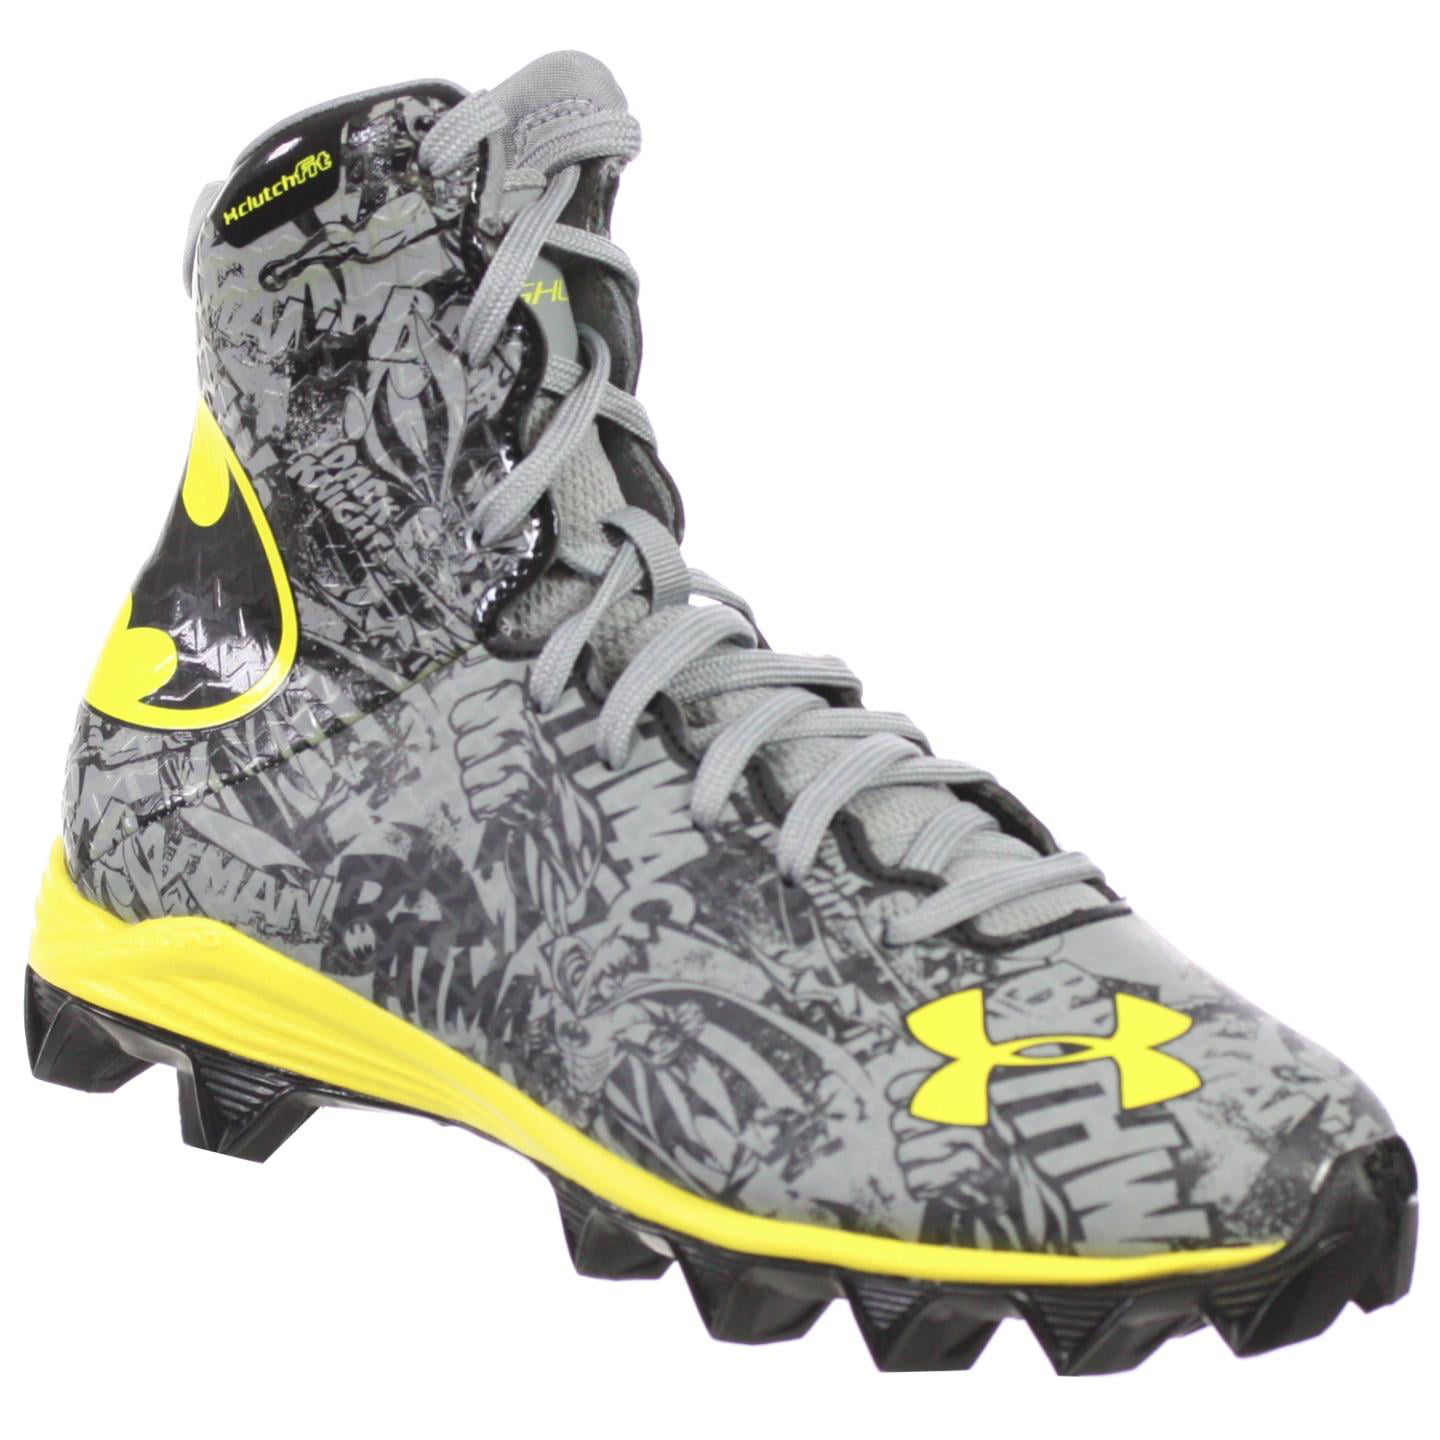 UNDER ARMOUR YOUTH FOOTBALL SHOES 